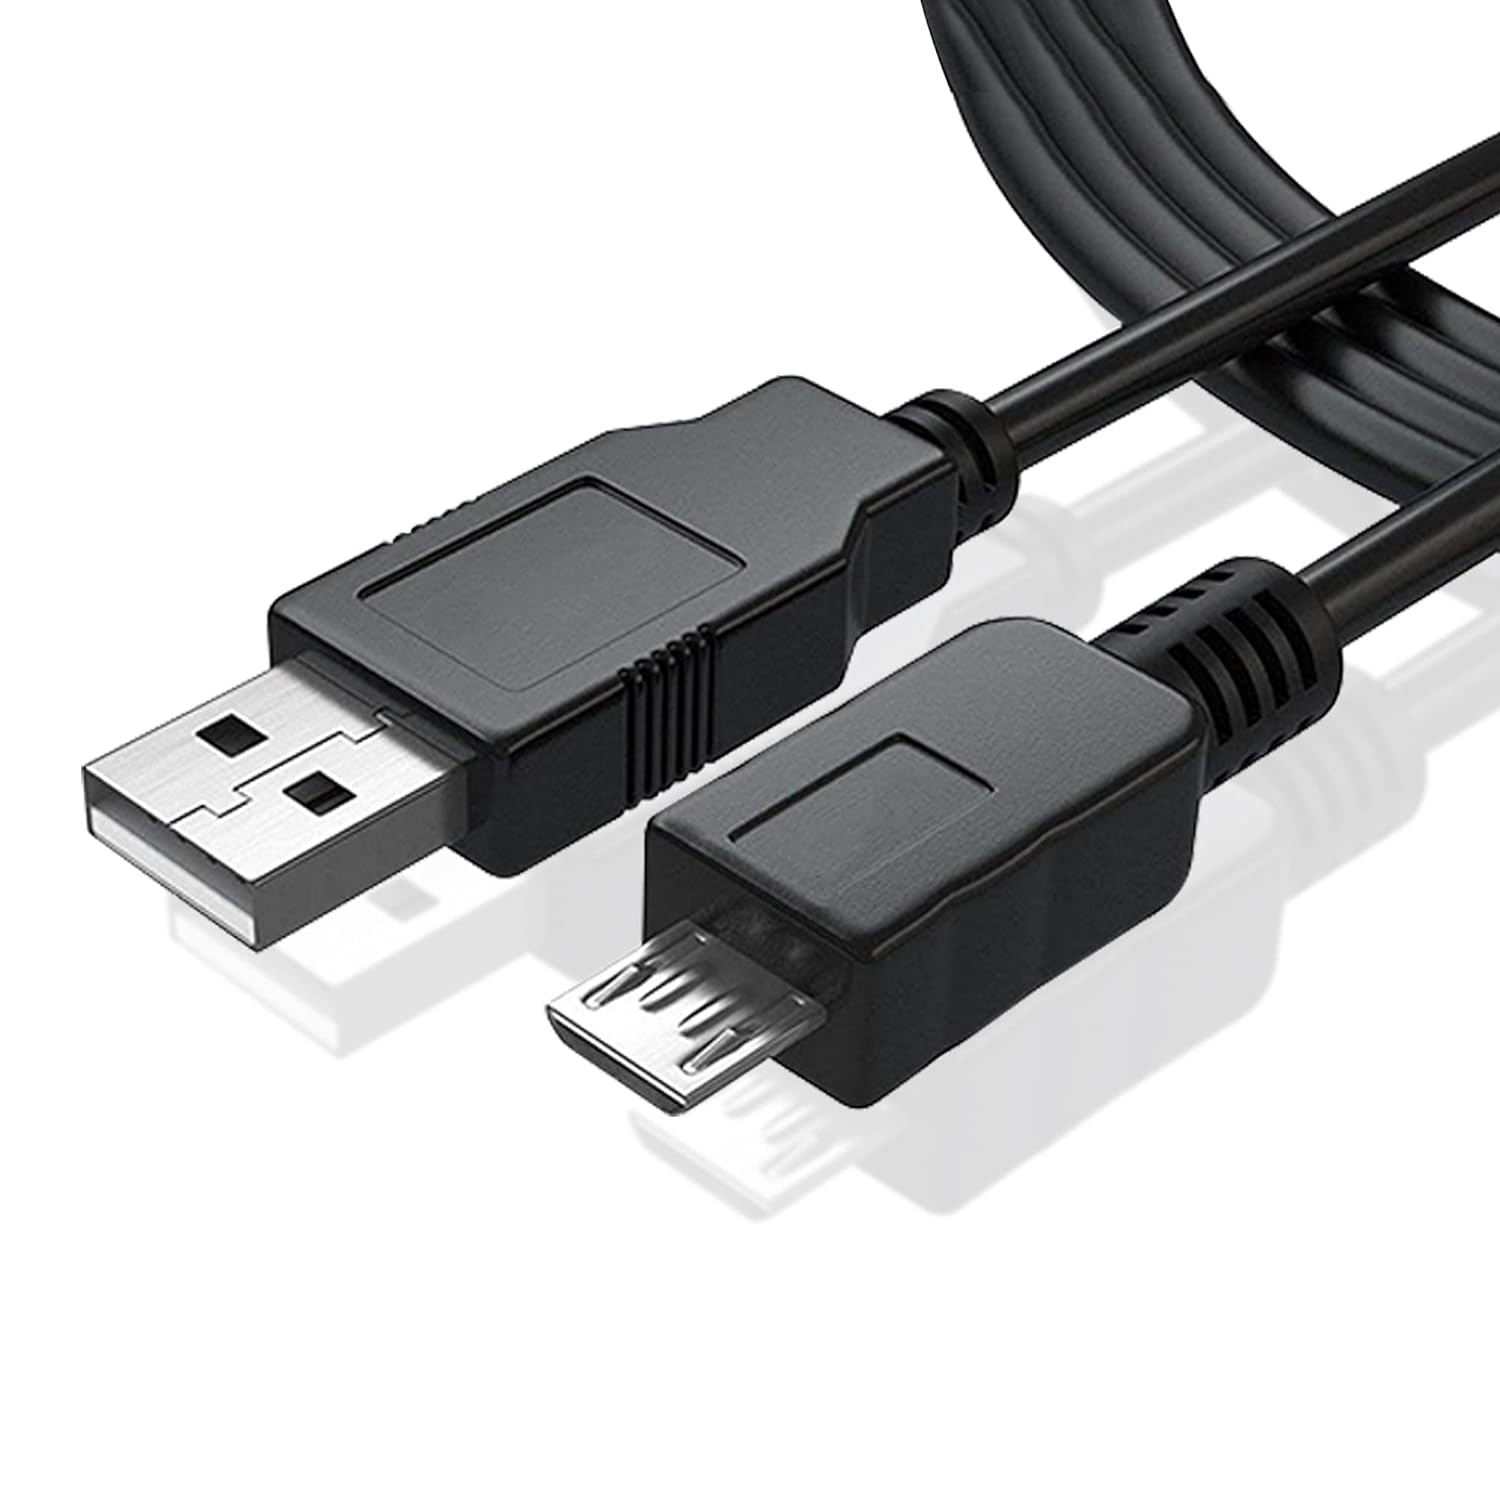 BRENDAZ {2-Pack) Micro USB Cable for Charging & Data Transfer